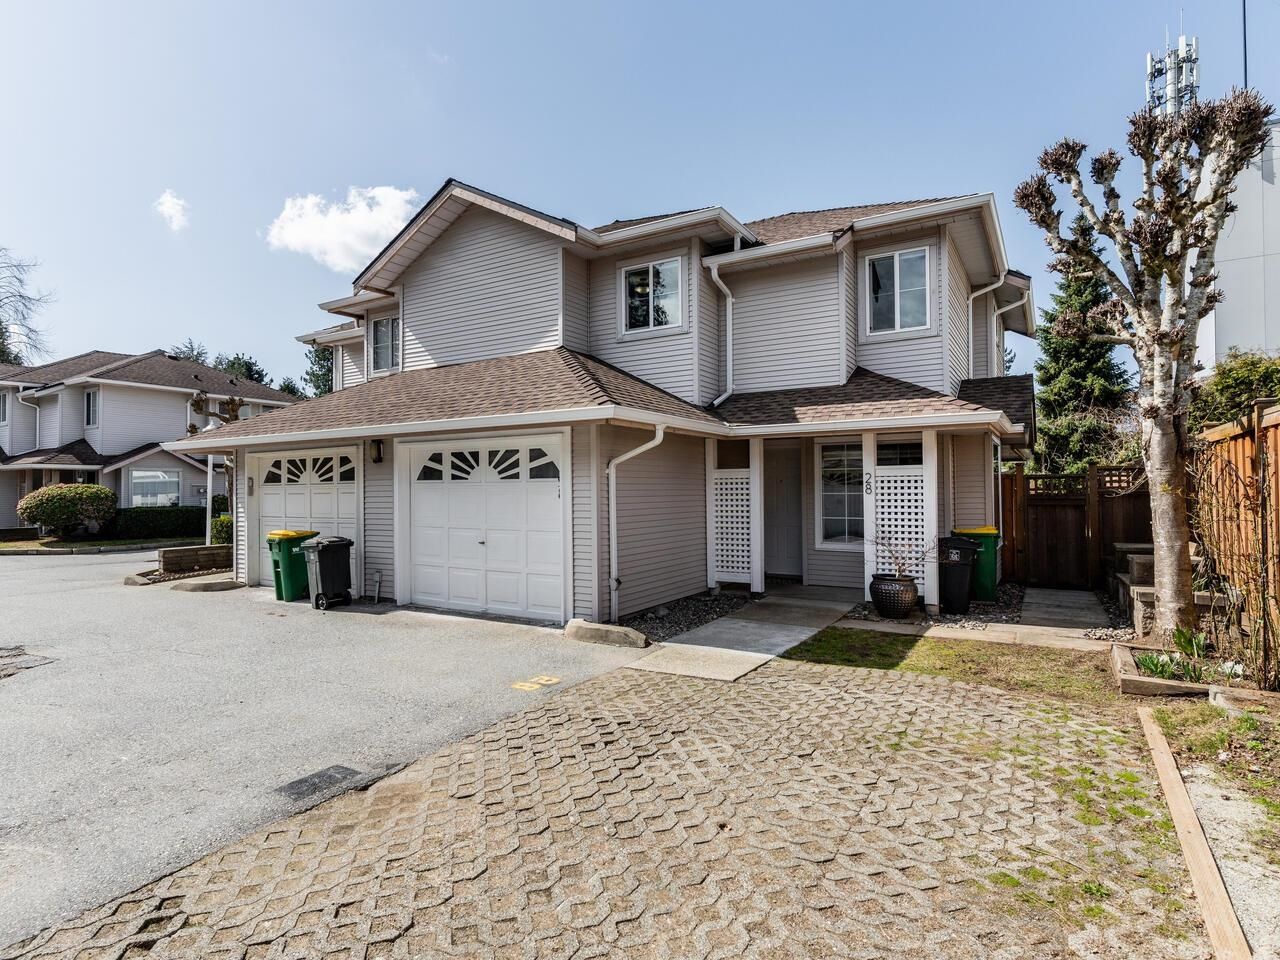 I have sold a property at 28 12188 HARRIS RD in Pitt Meadows
